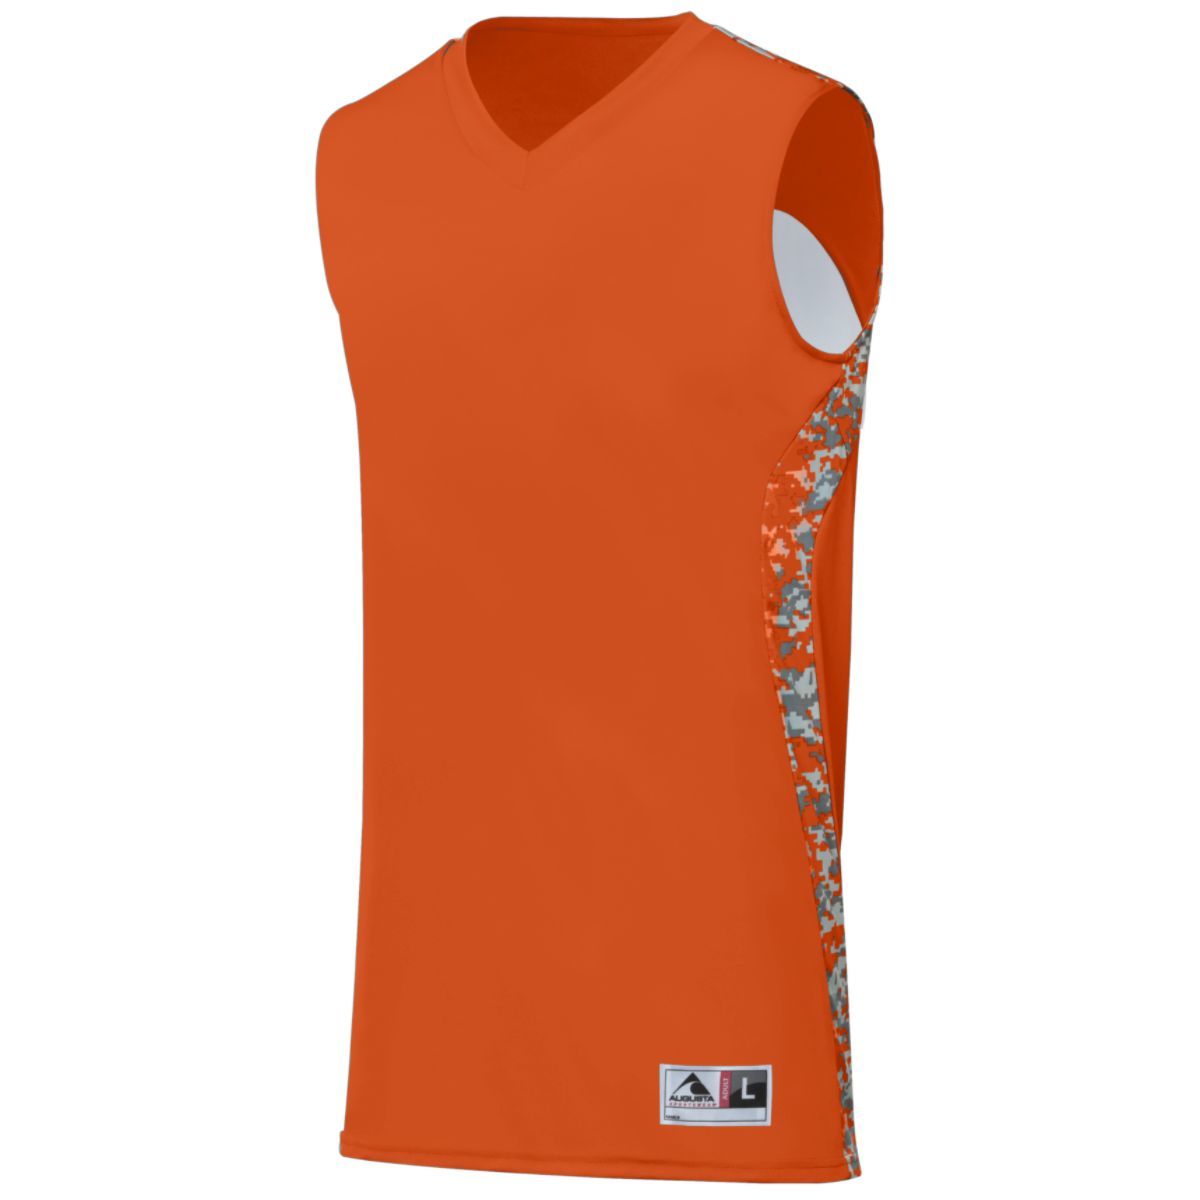 Augusta Sportswear Youth Hook Shot Reversible Jersey in Orange/Orange Digi  -Part of the Youth, Youth-Jersey, Augusta-Products, Basketball, Shirts, All-Sports, All-Sports-1 product lines at KanaleyCreations.com